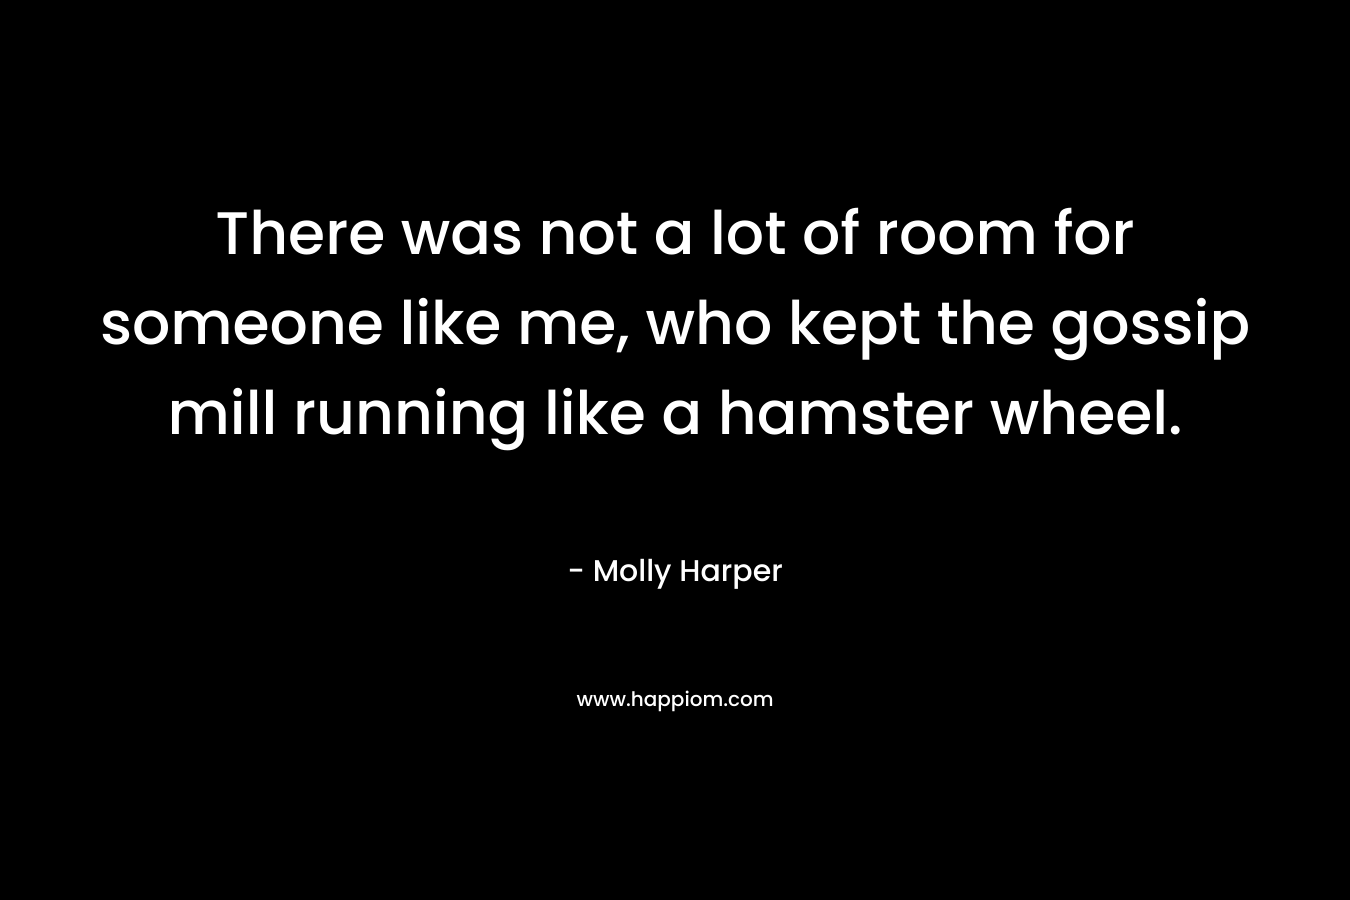 There was not a lot of room for someone like me, who kept the gossip mill running like a hamster wheel. – Molly Harper